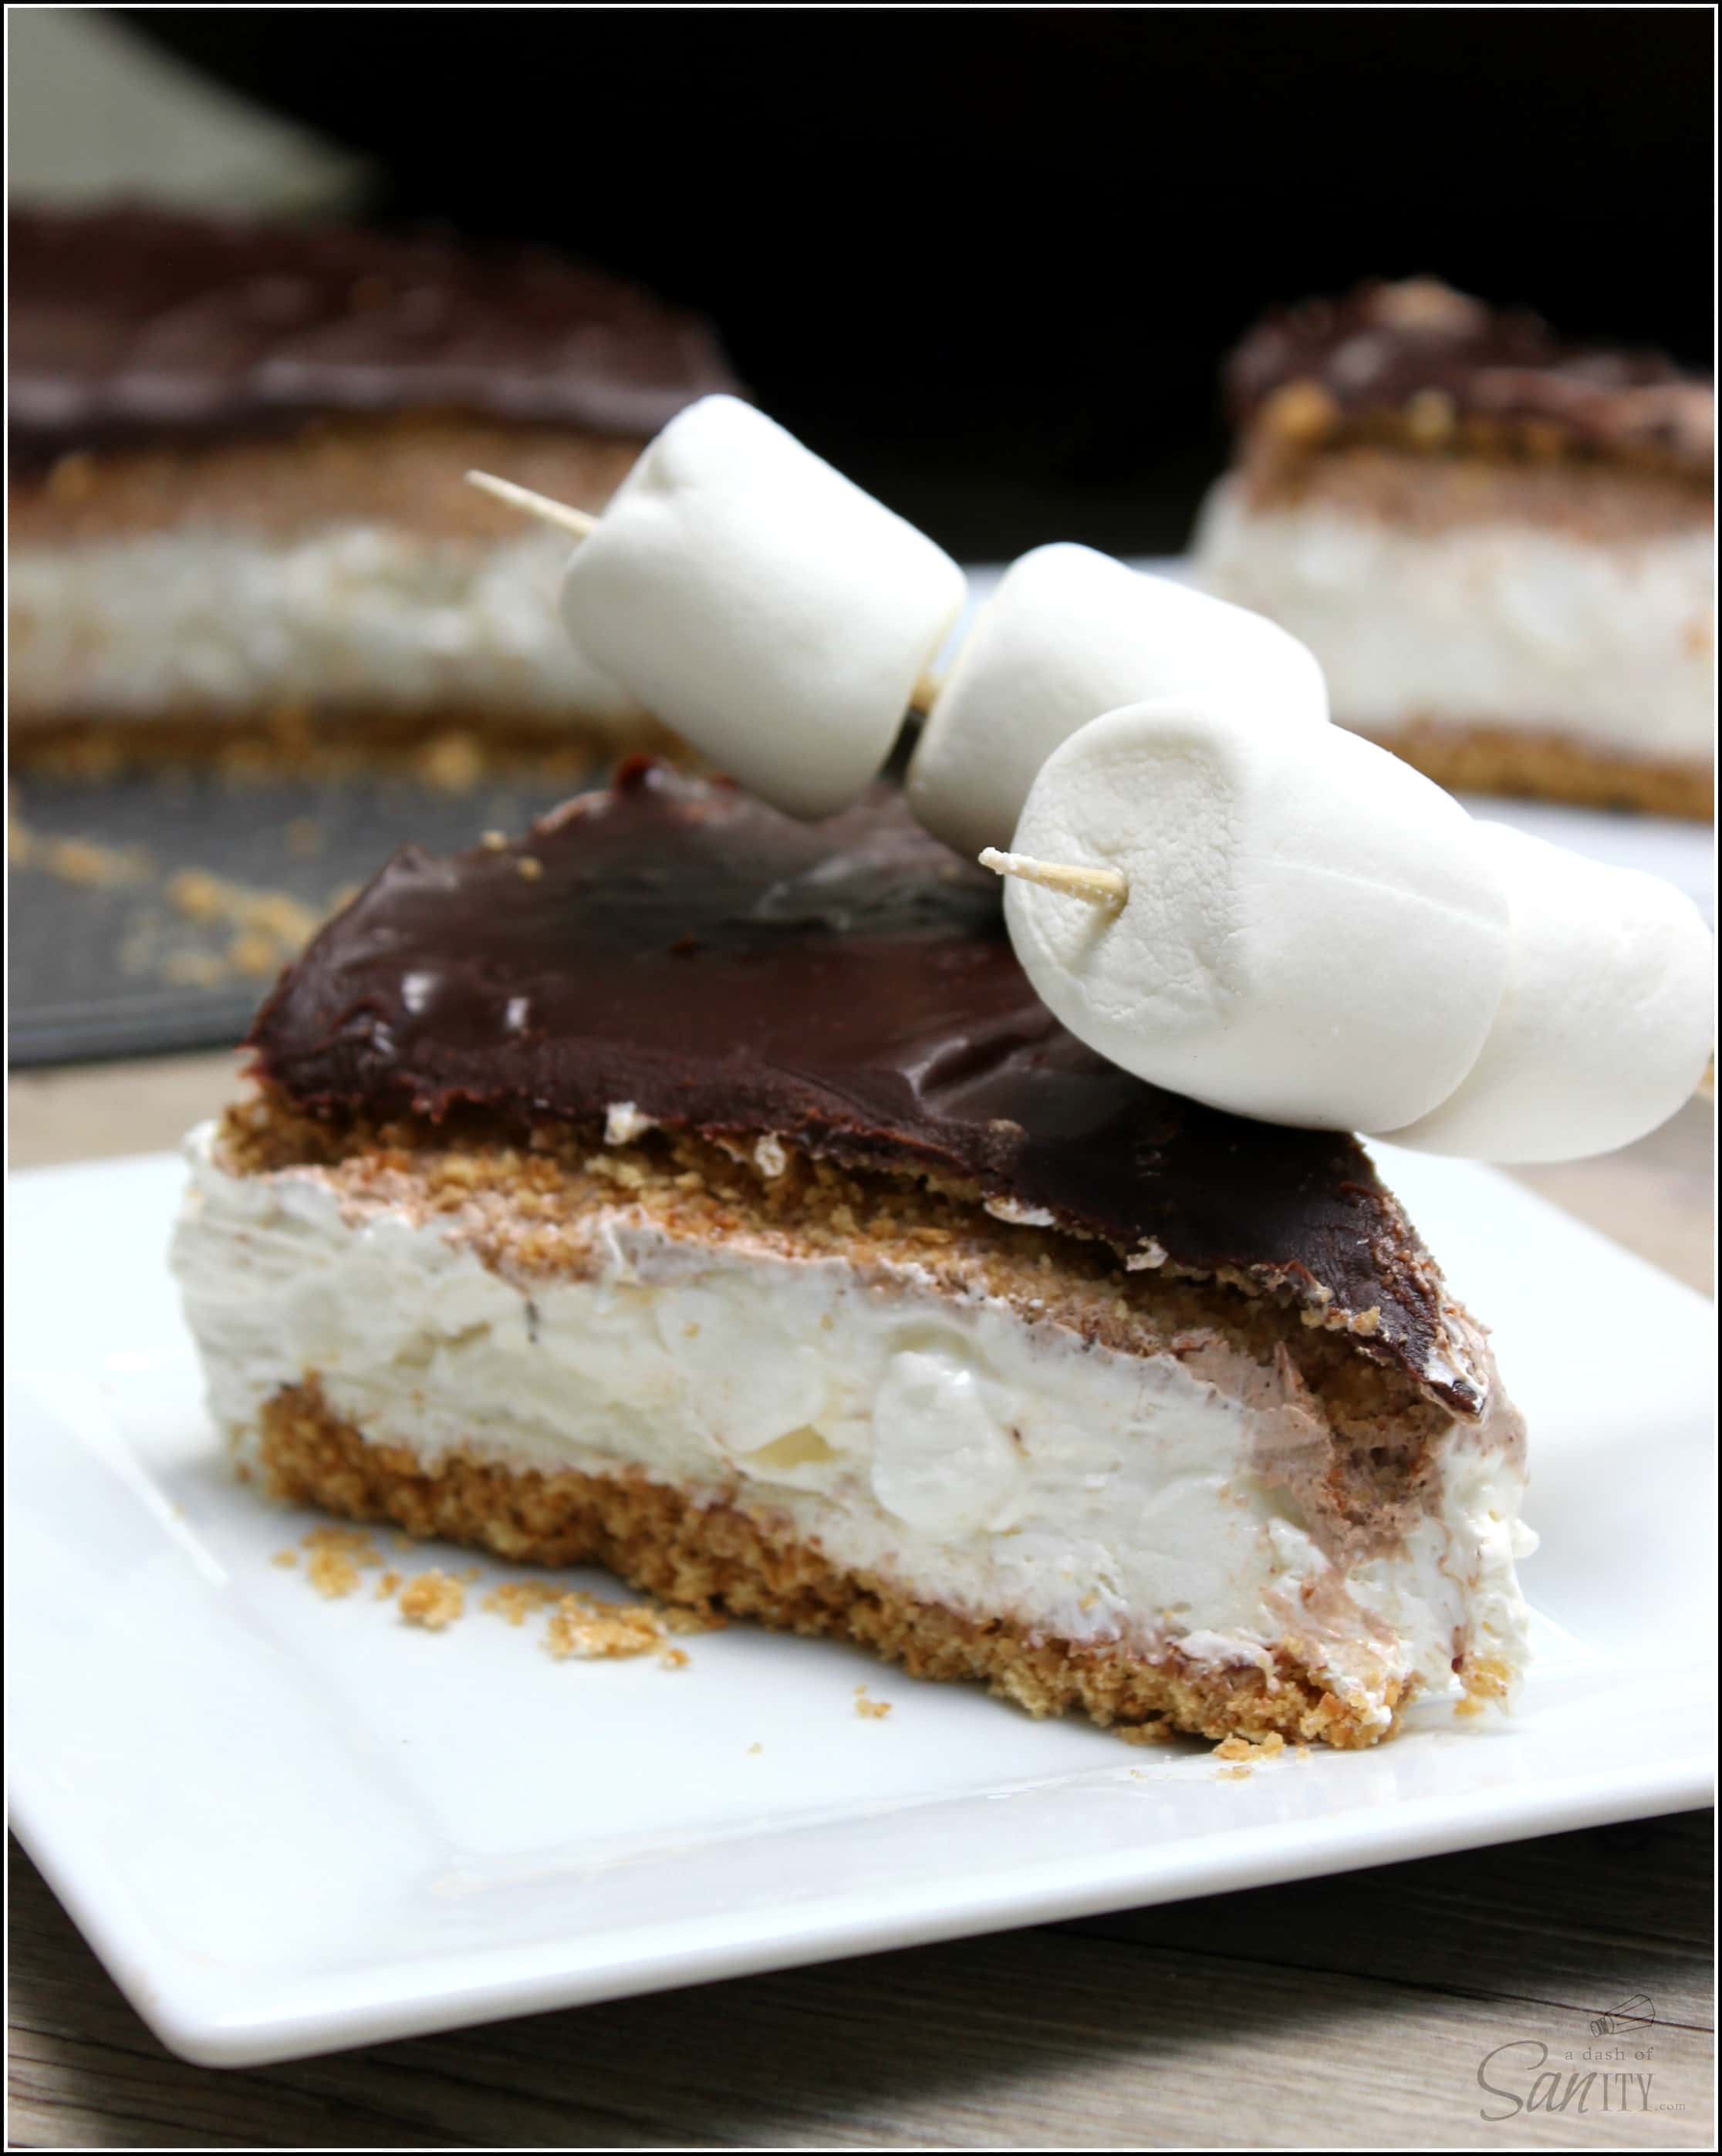 S'mores No Bake Cheesecake- inspired by the famous campfire treat. Made with marshmallow cream, graham cracker crust. & a rich chocolate ganache.